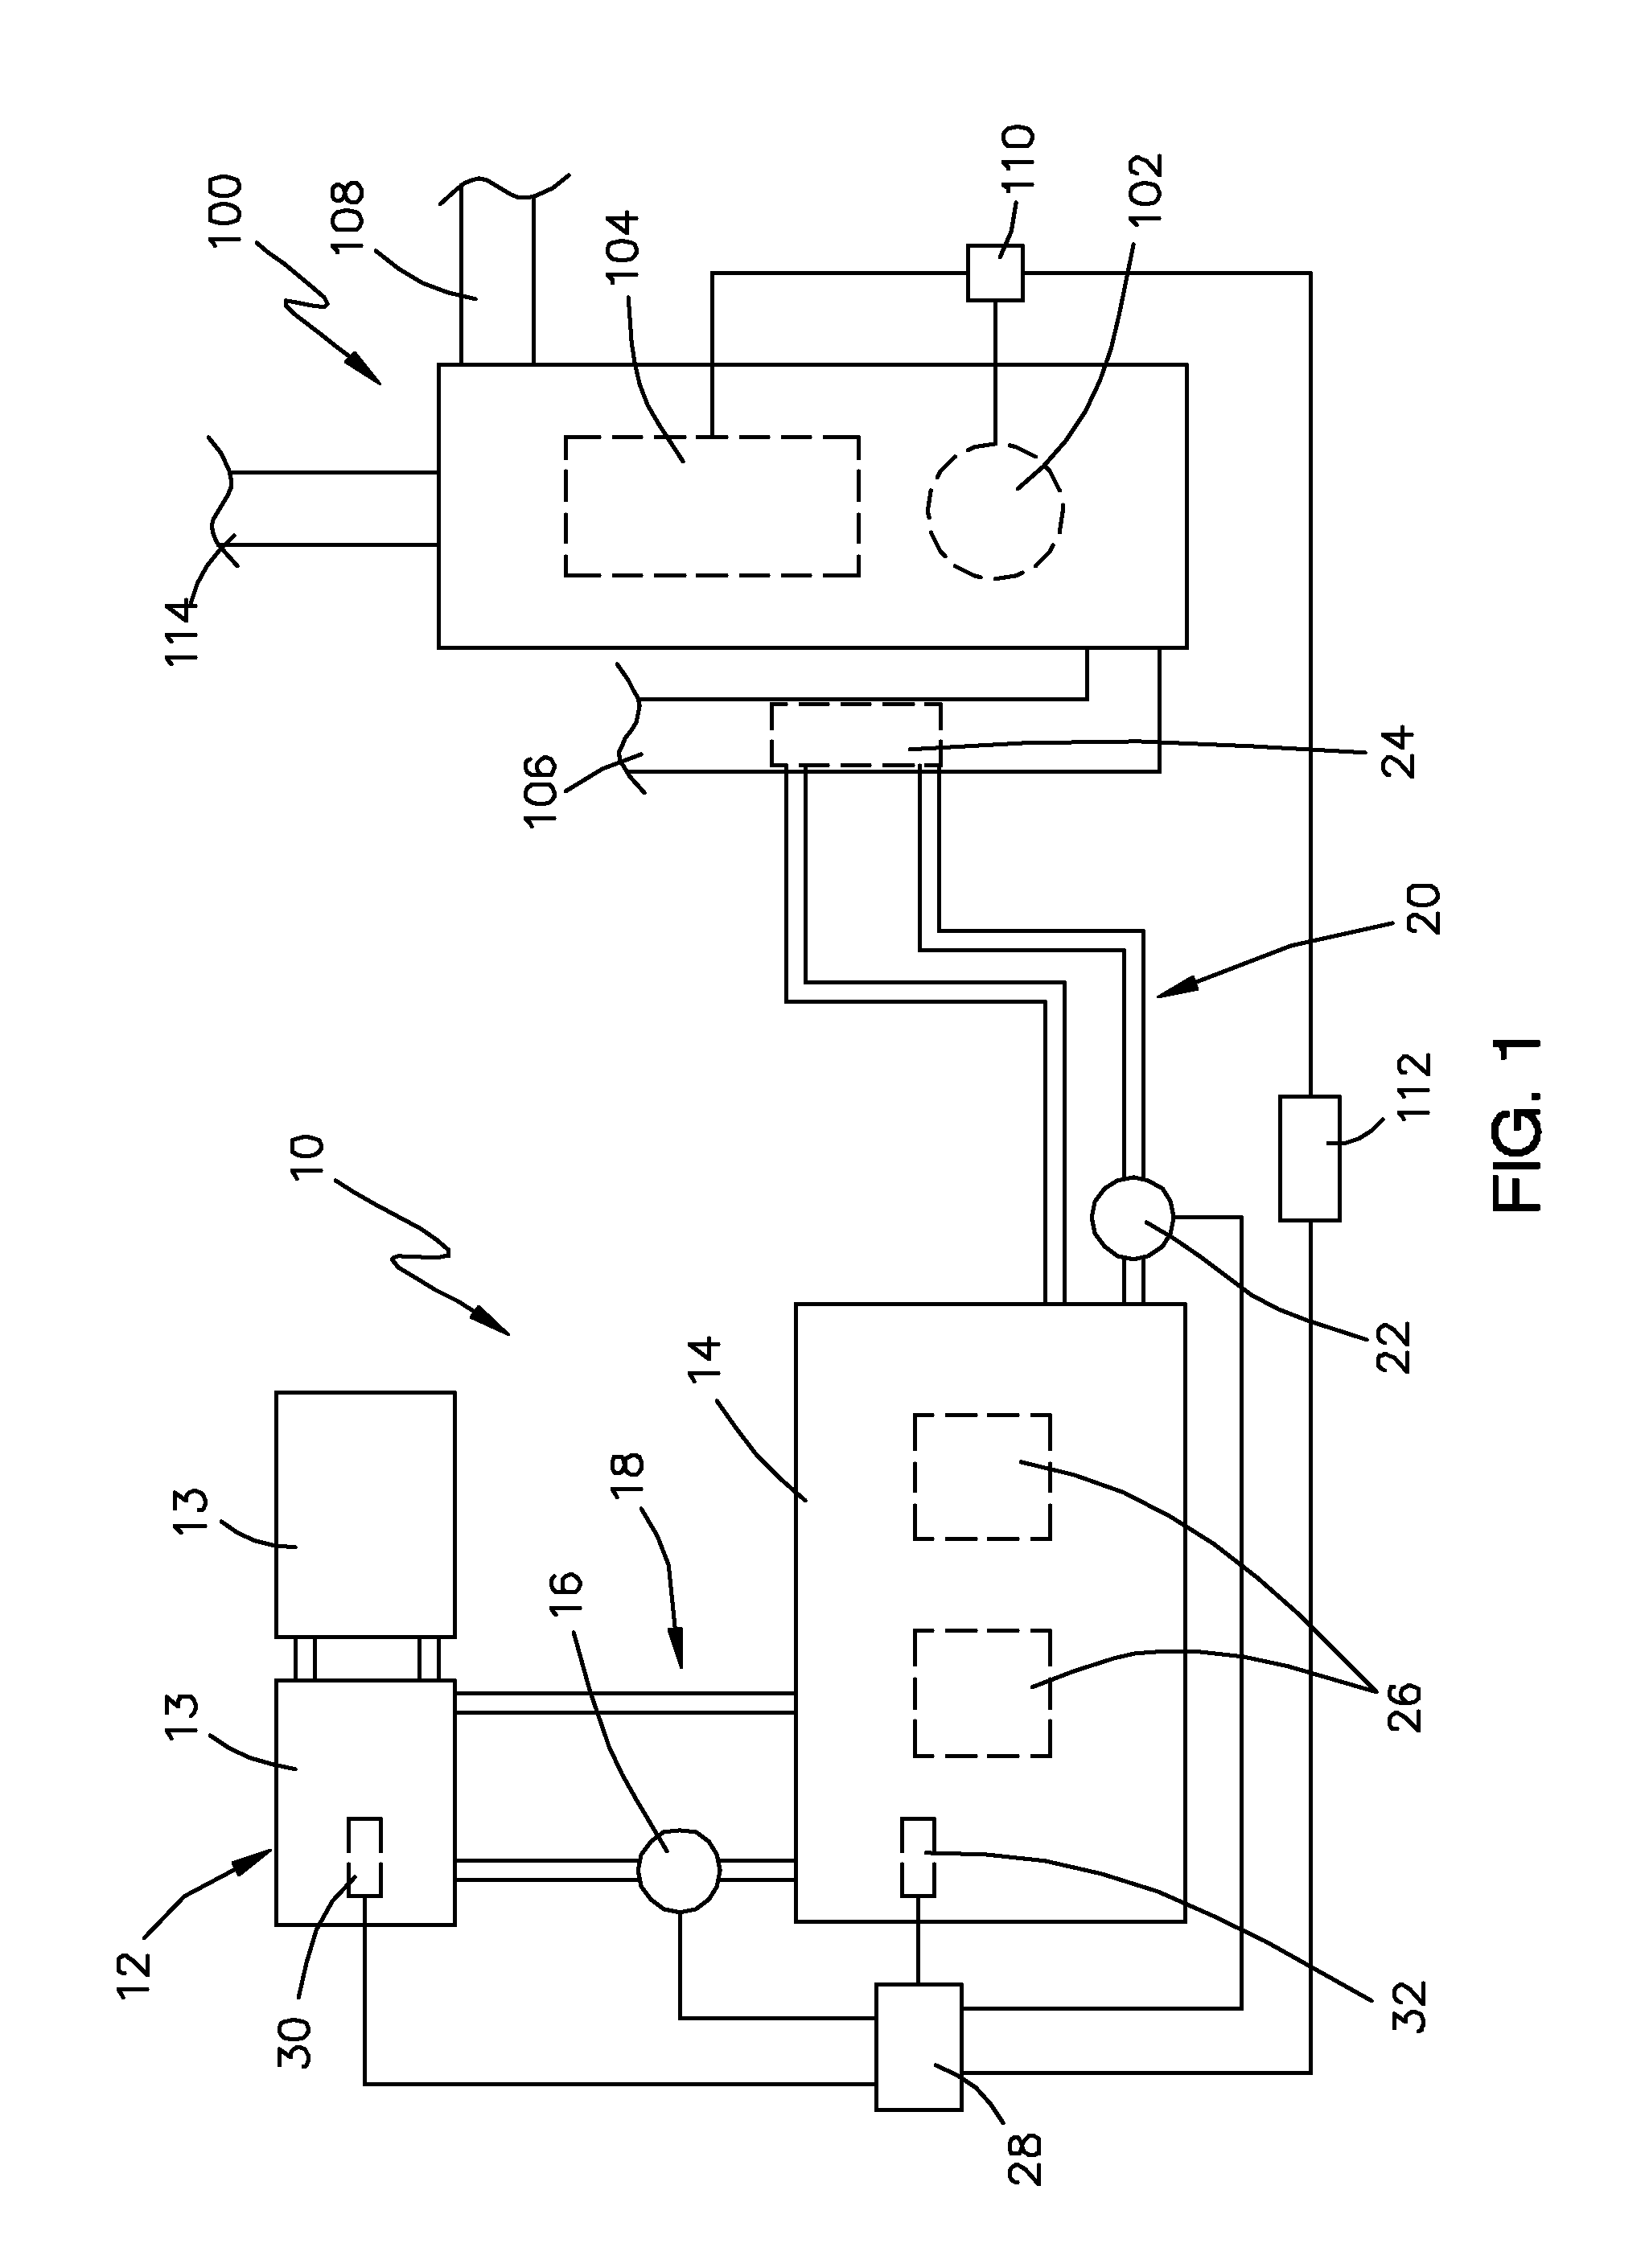 Method and apparatus for solar heating air in a forced draft heating system